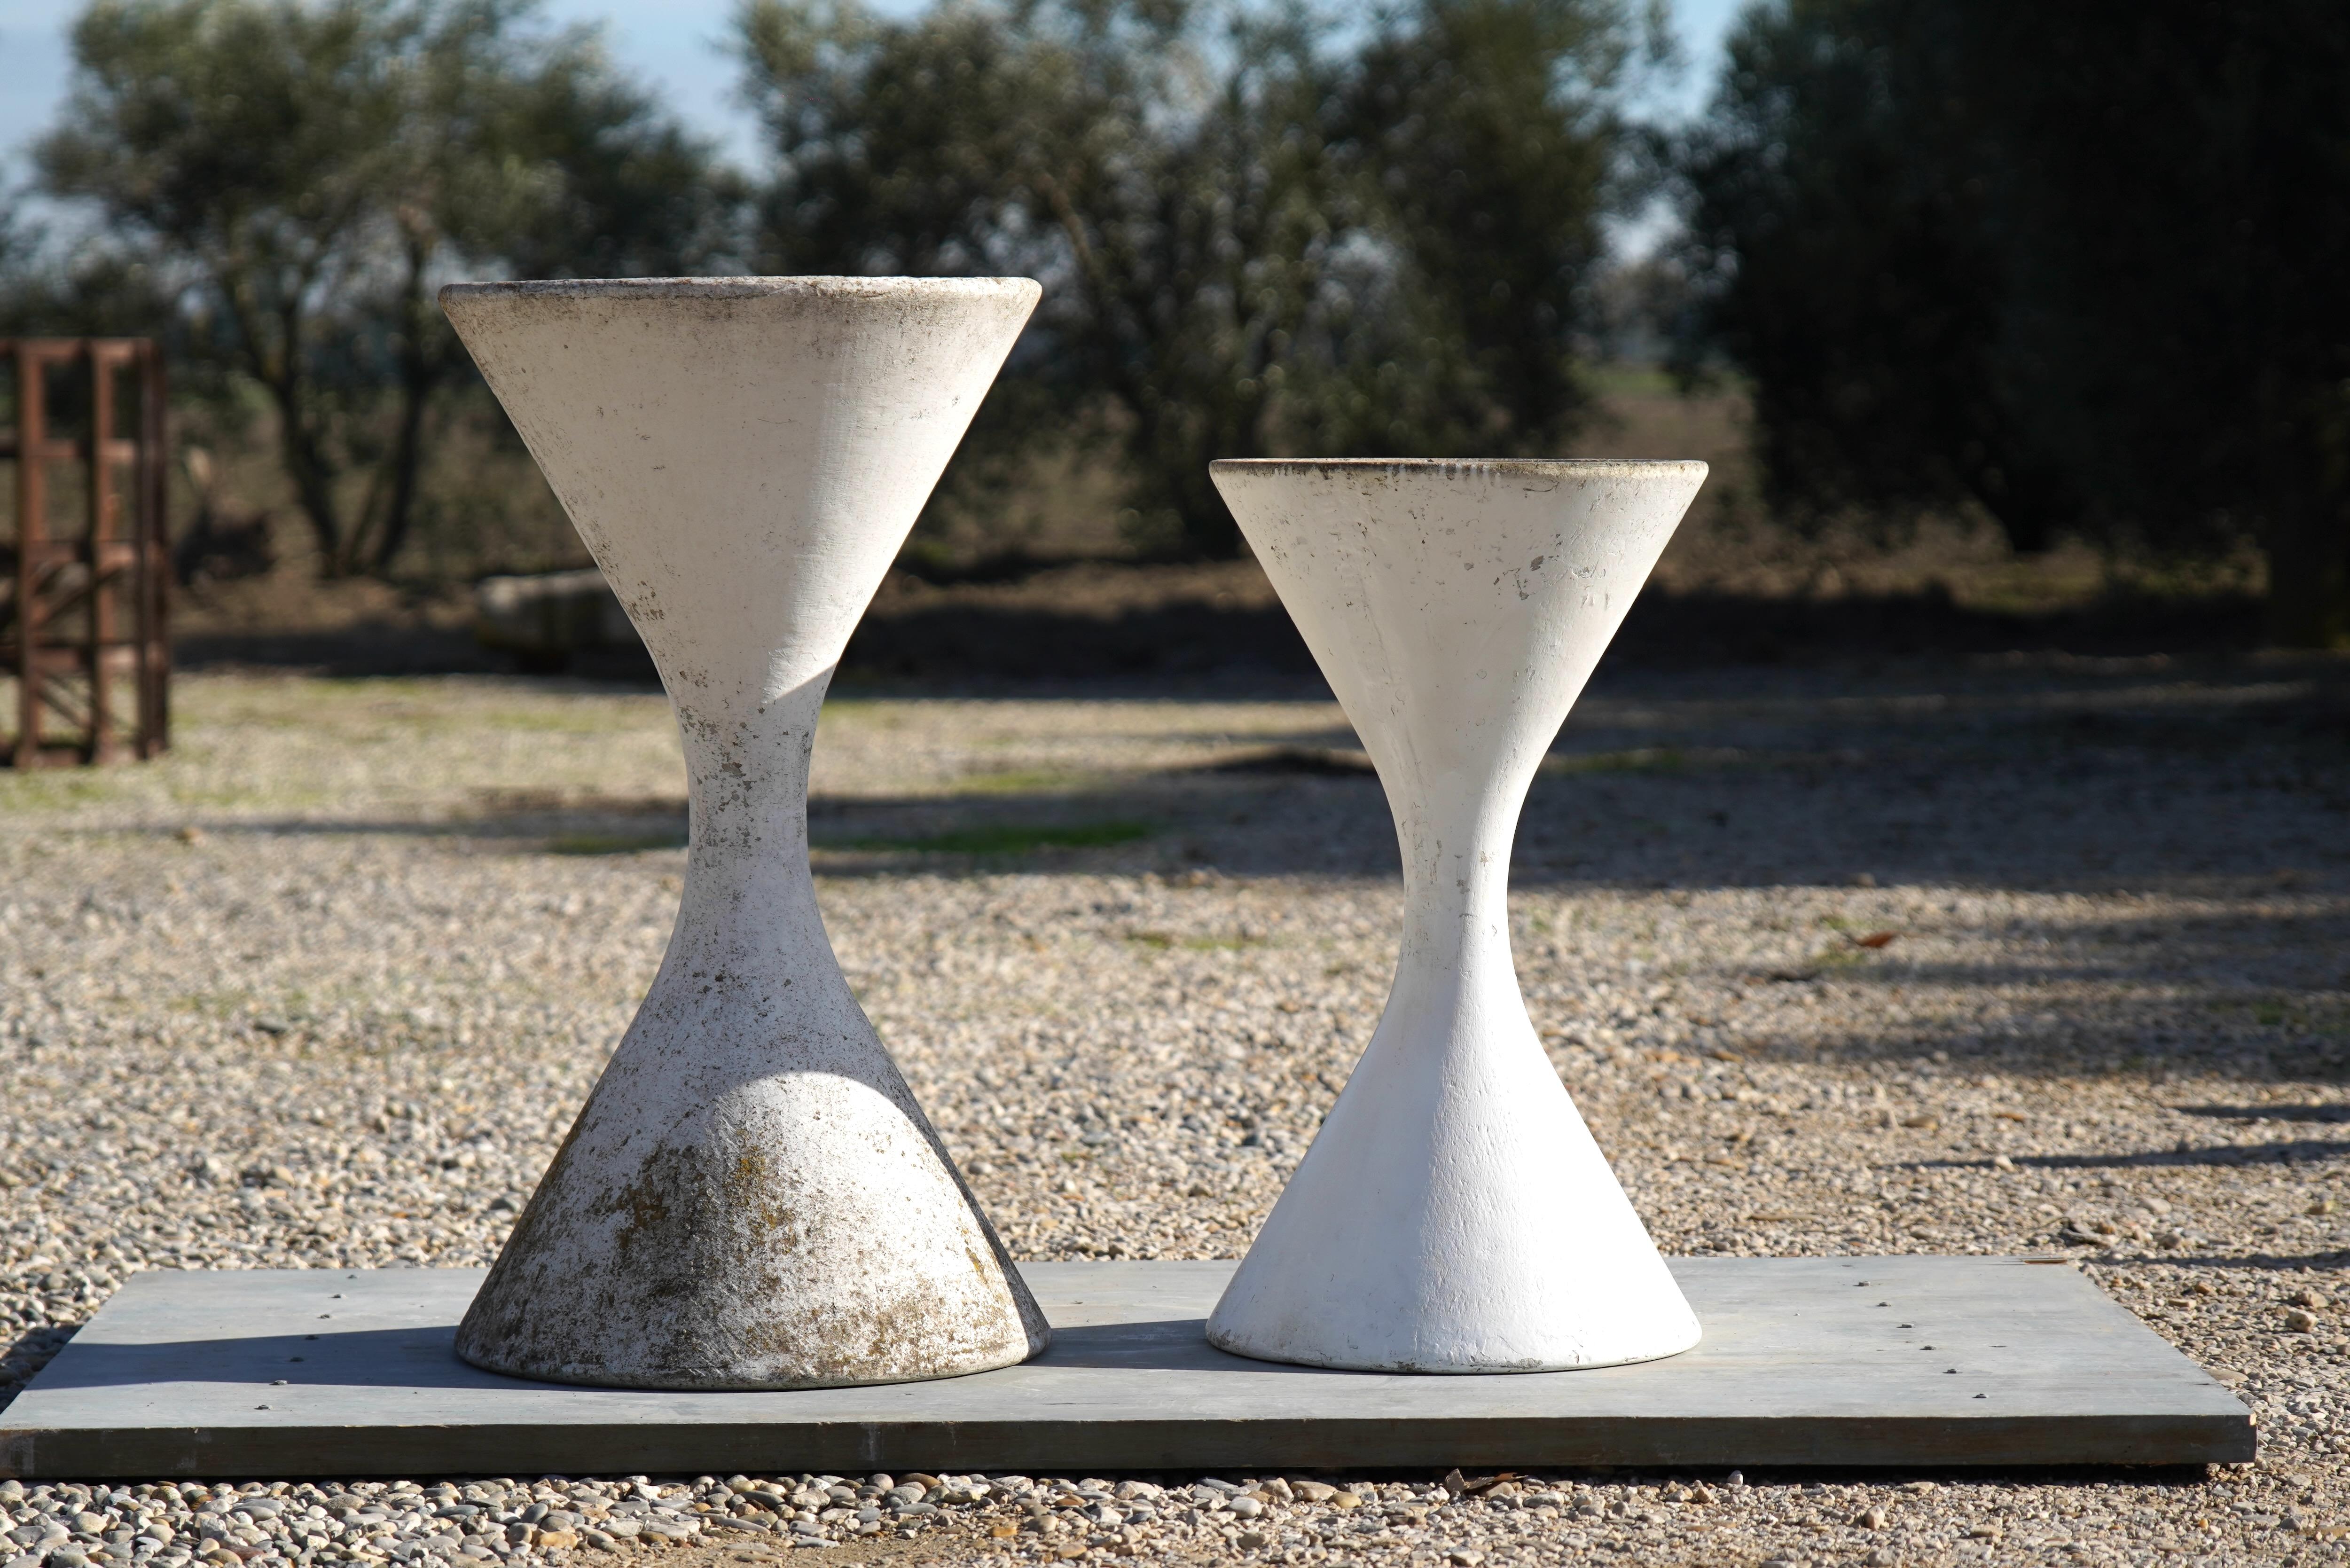 Pair of iconic vintage 'Diablo' Planters by Swiss neo-functionalist and industrial design pioneer Willy Guhl for Eternit, Switzerland, circa 1970. 

Made from fibre-cement, these pieces were sprayed white by one of the previous owners and have a